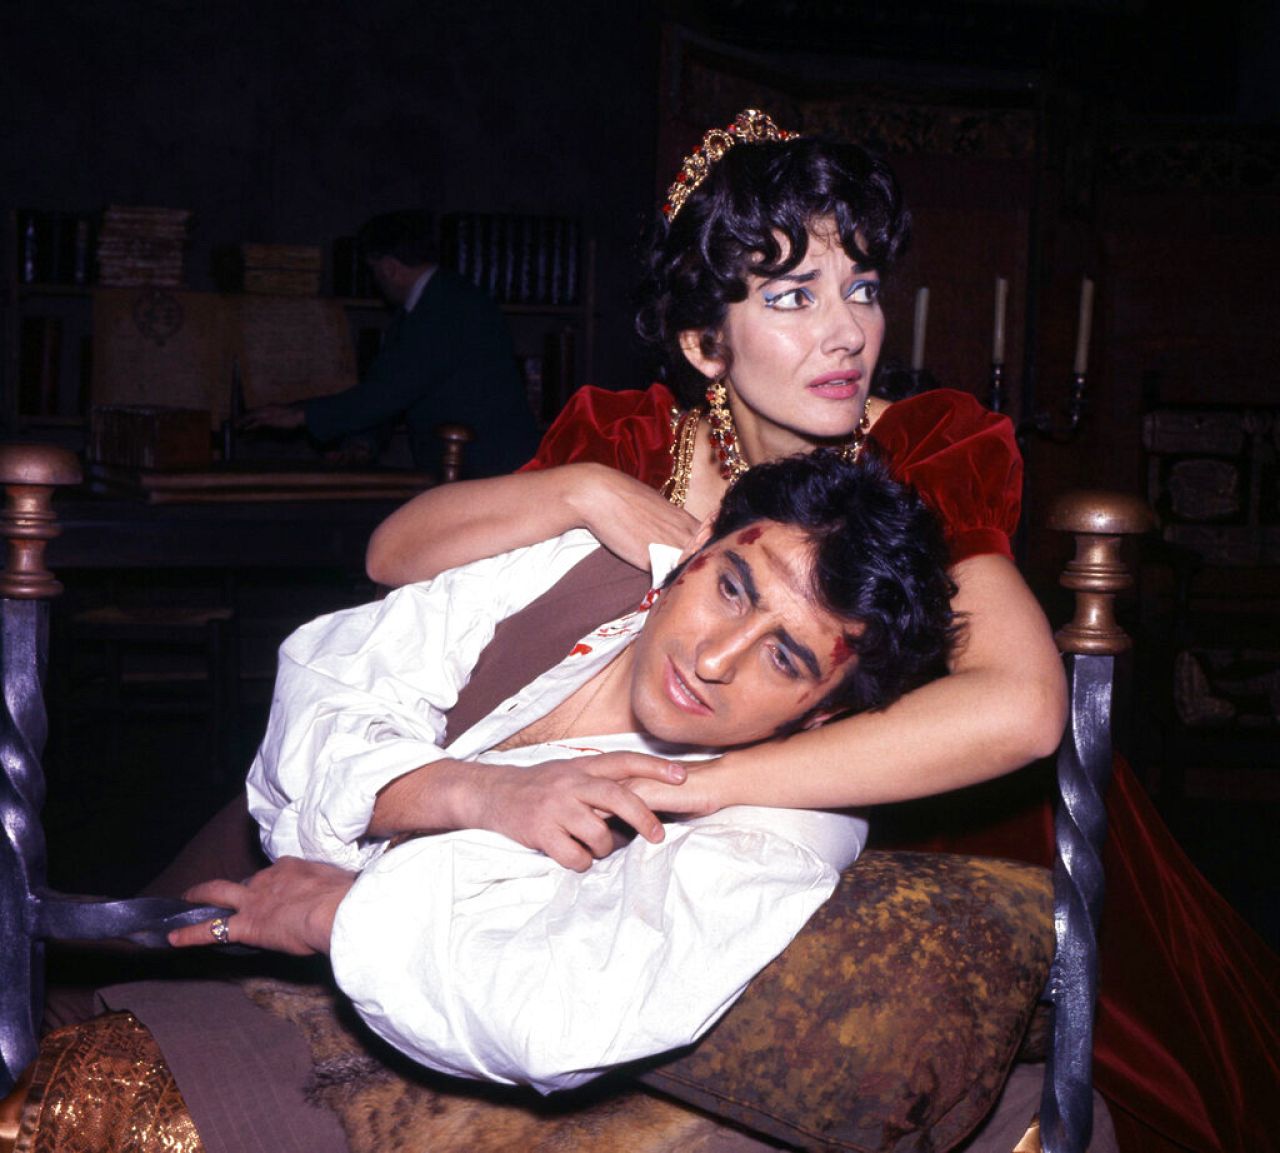 Callas pictured on stage with Renato Cioni during the gala performance of Tosca at the Royal Covent Garden Opera House, London, on Monday, July 5, 1965.